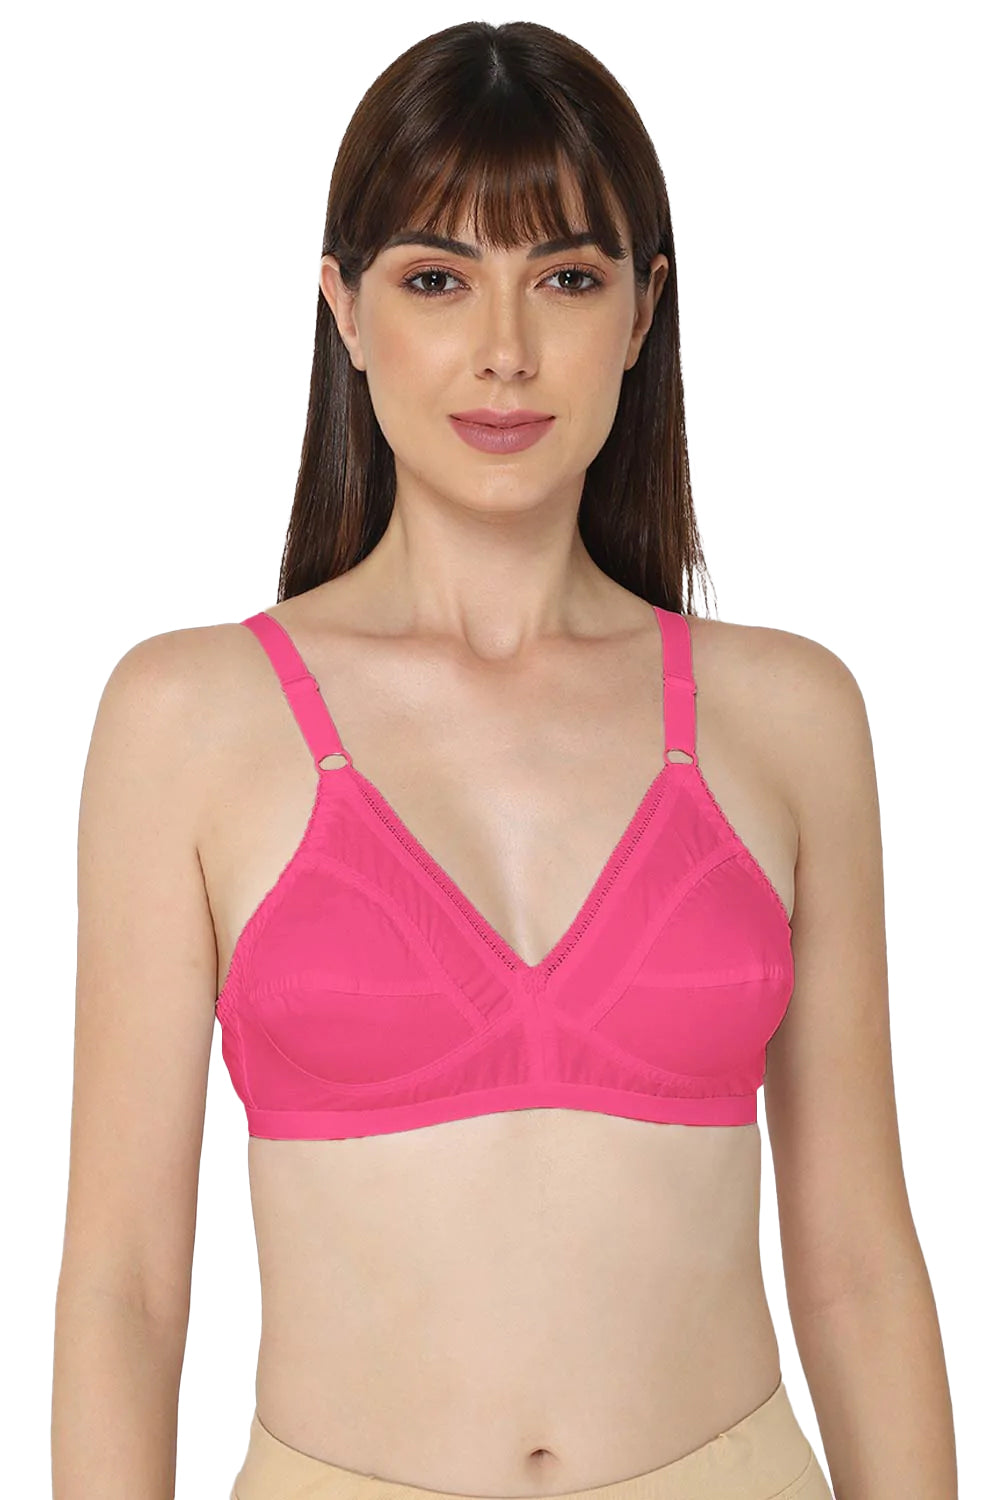 Naidu Hall Heritage-Bra Special Combo Pack - Naturalle - C66